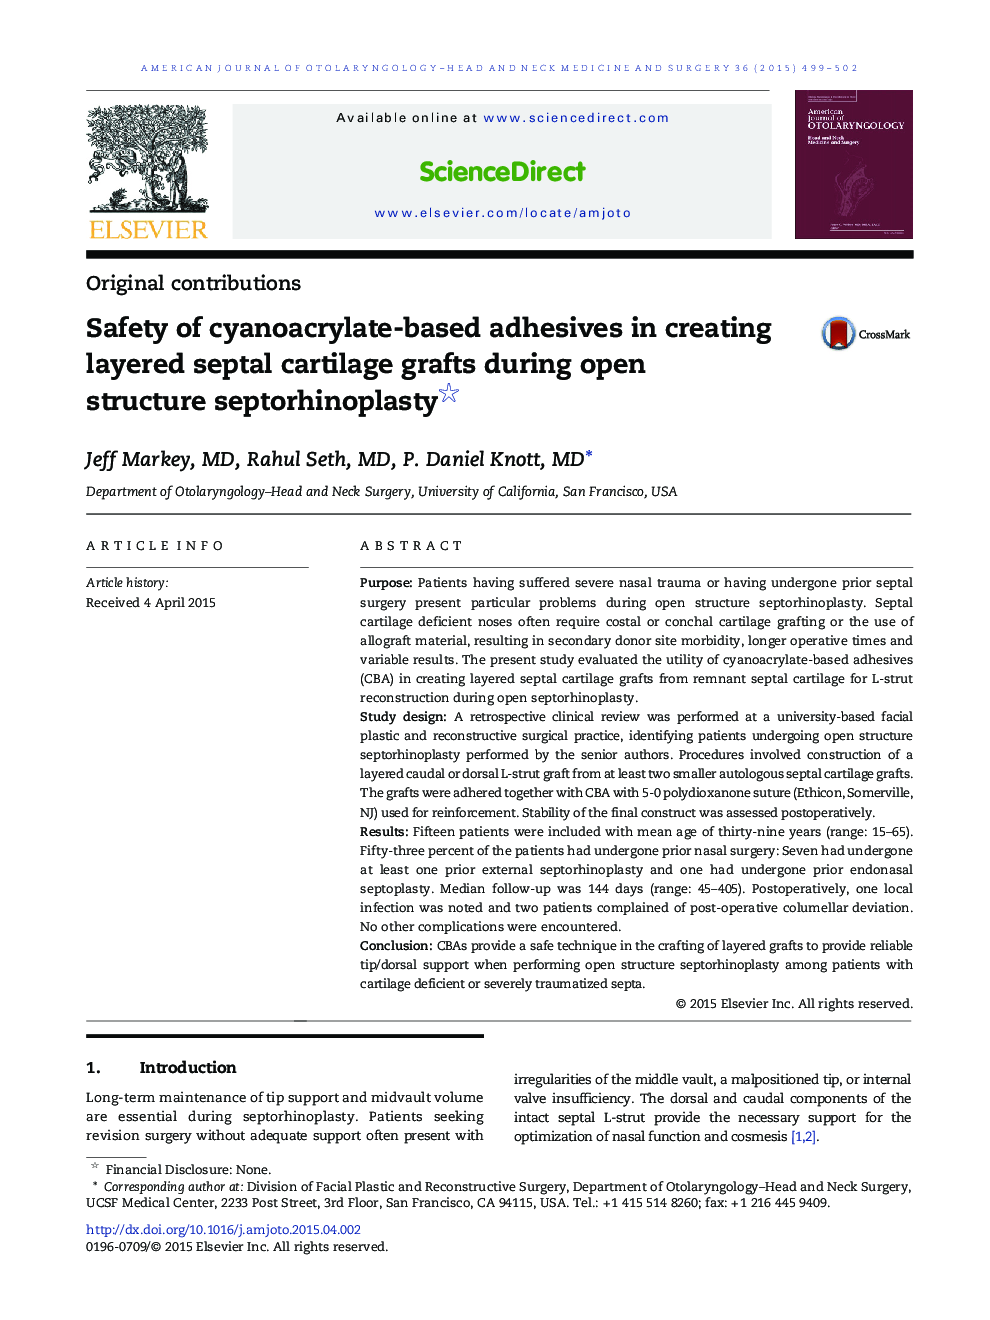 Safety of cyanoacrylate-based adhesives in creating layered septal cartilage grafts during open structure septorhinoplasty 